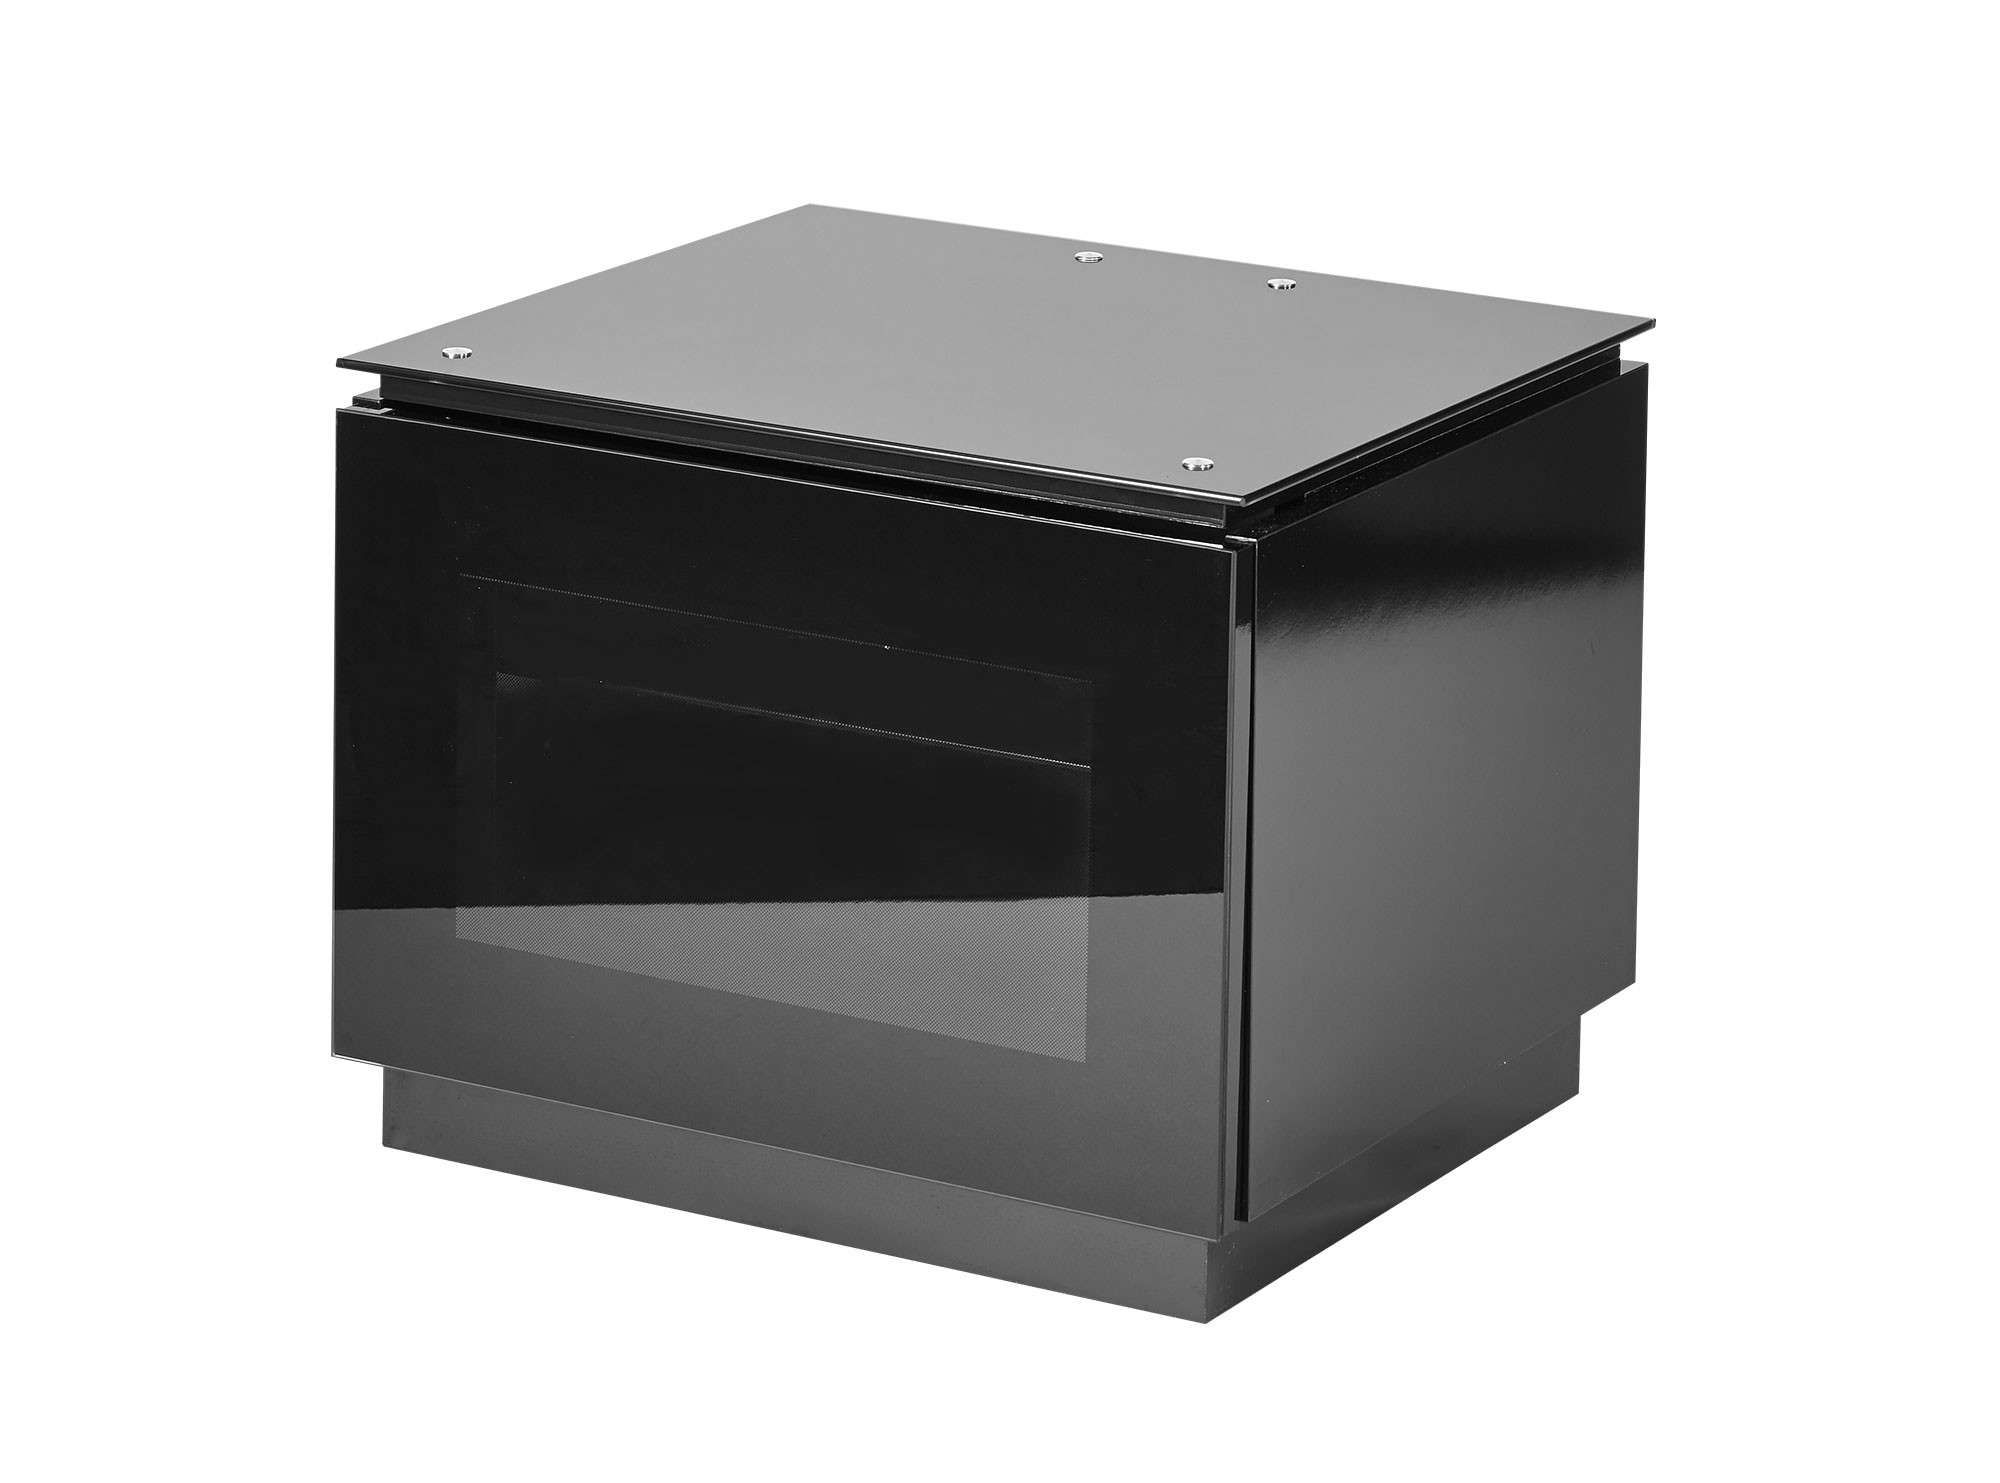 Small Black Gloss Tv Cabinet For Up To 32" Tv | Mmt D550 Intended For Black Gloss Tv Cabinets (Gallery 19 of 20)